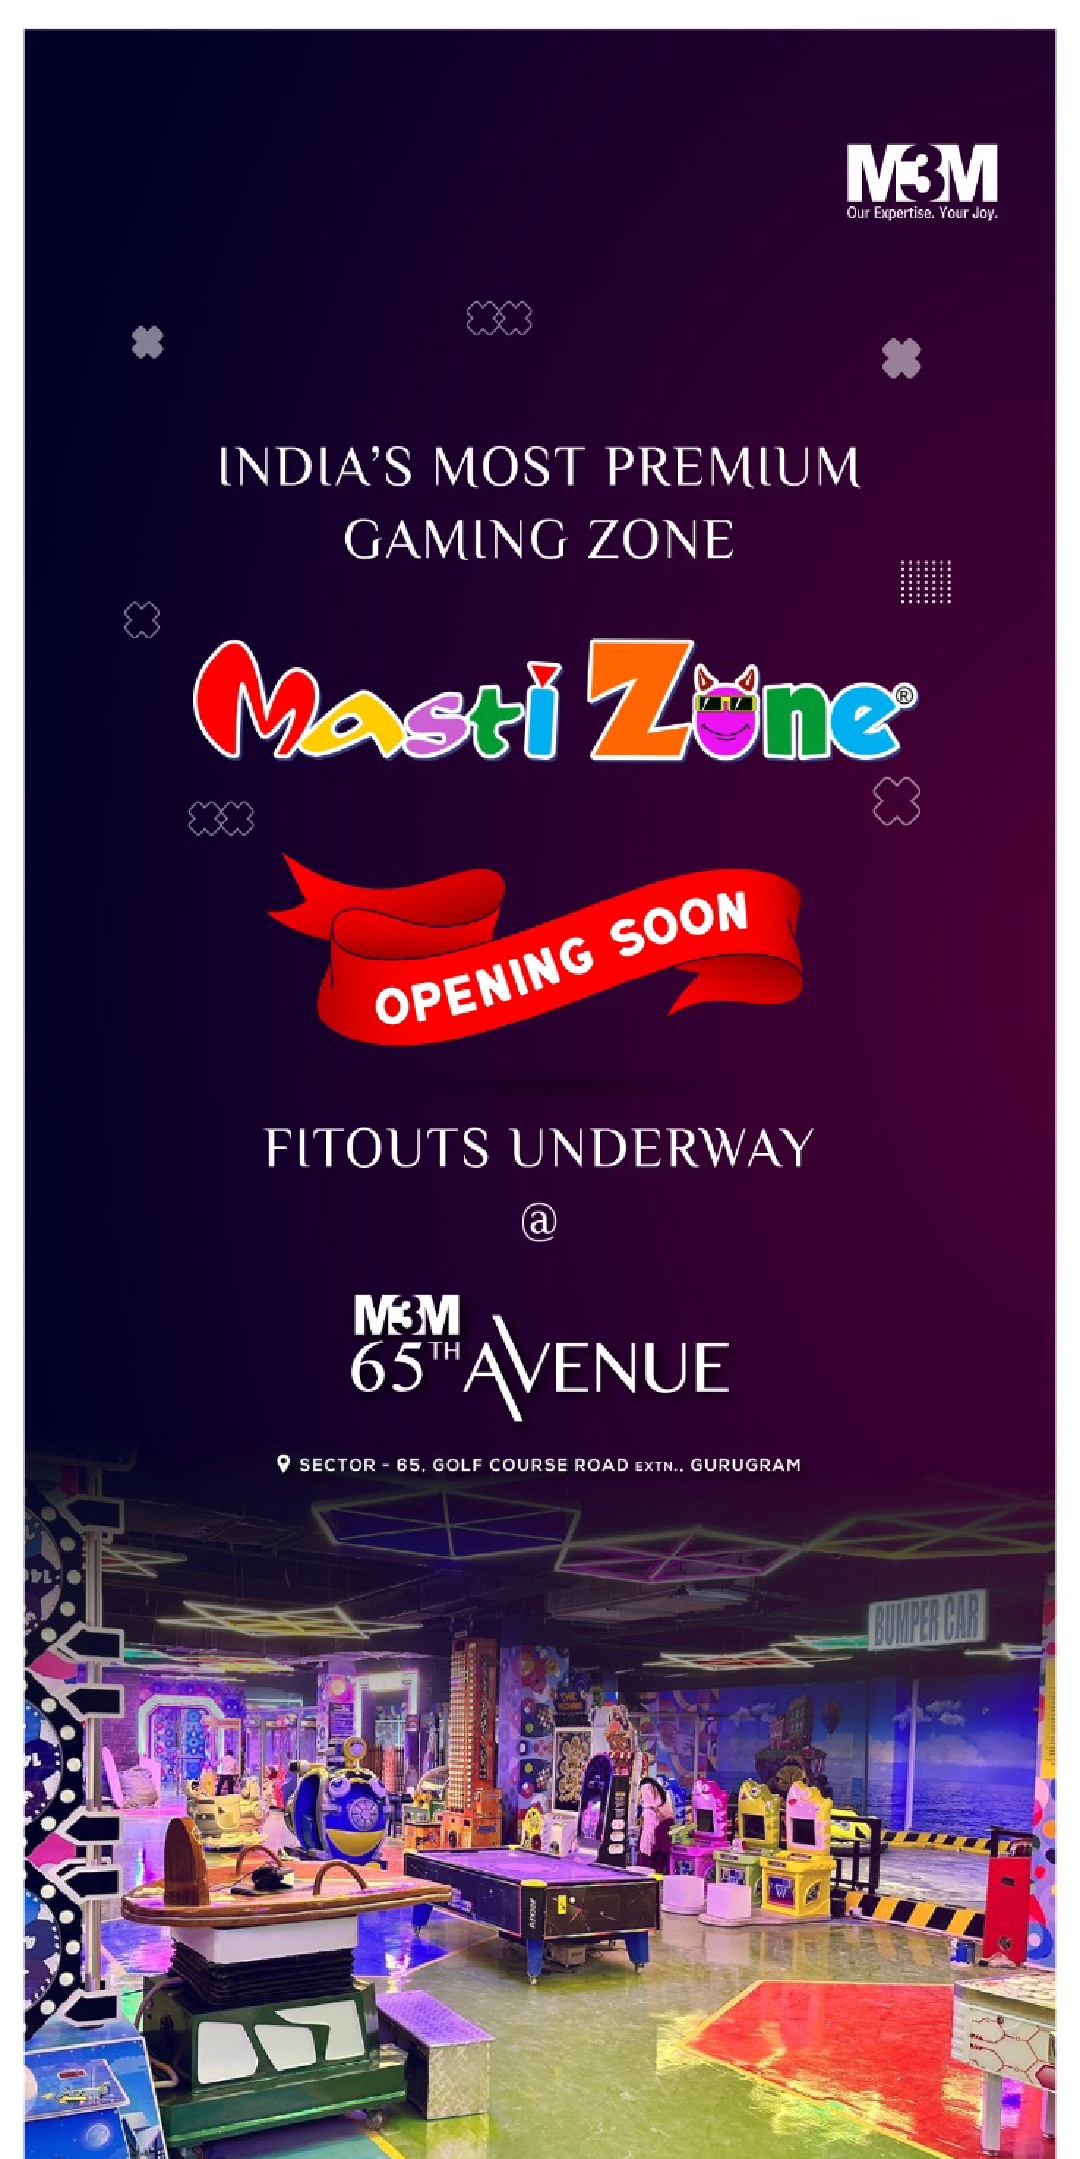 India's Most premium gaming zone opening soon at M3M 65th Avenue, Gurgaon Update